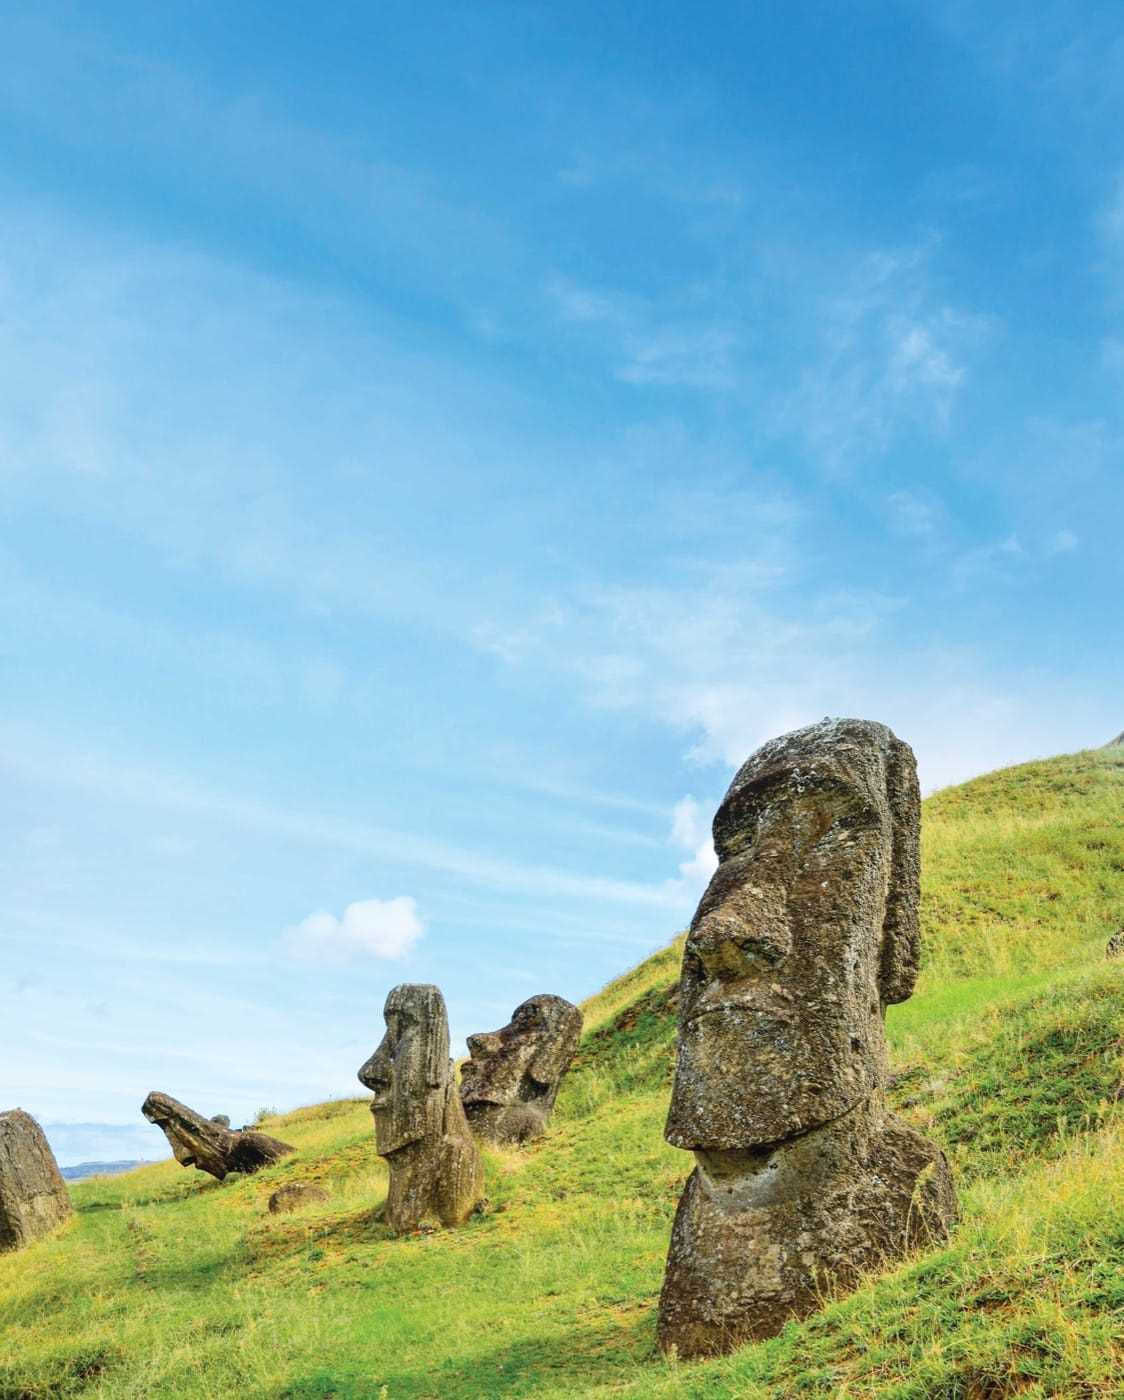 The carved stone heads of the Easter Islands stare blankly ahead from their grassy knoll